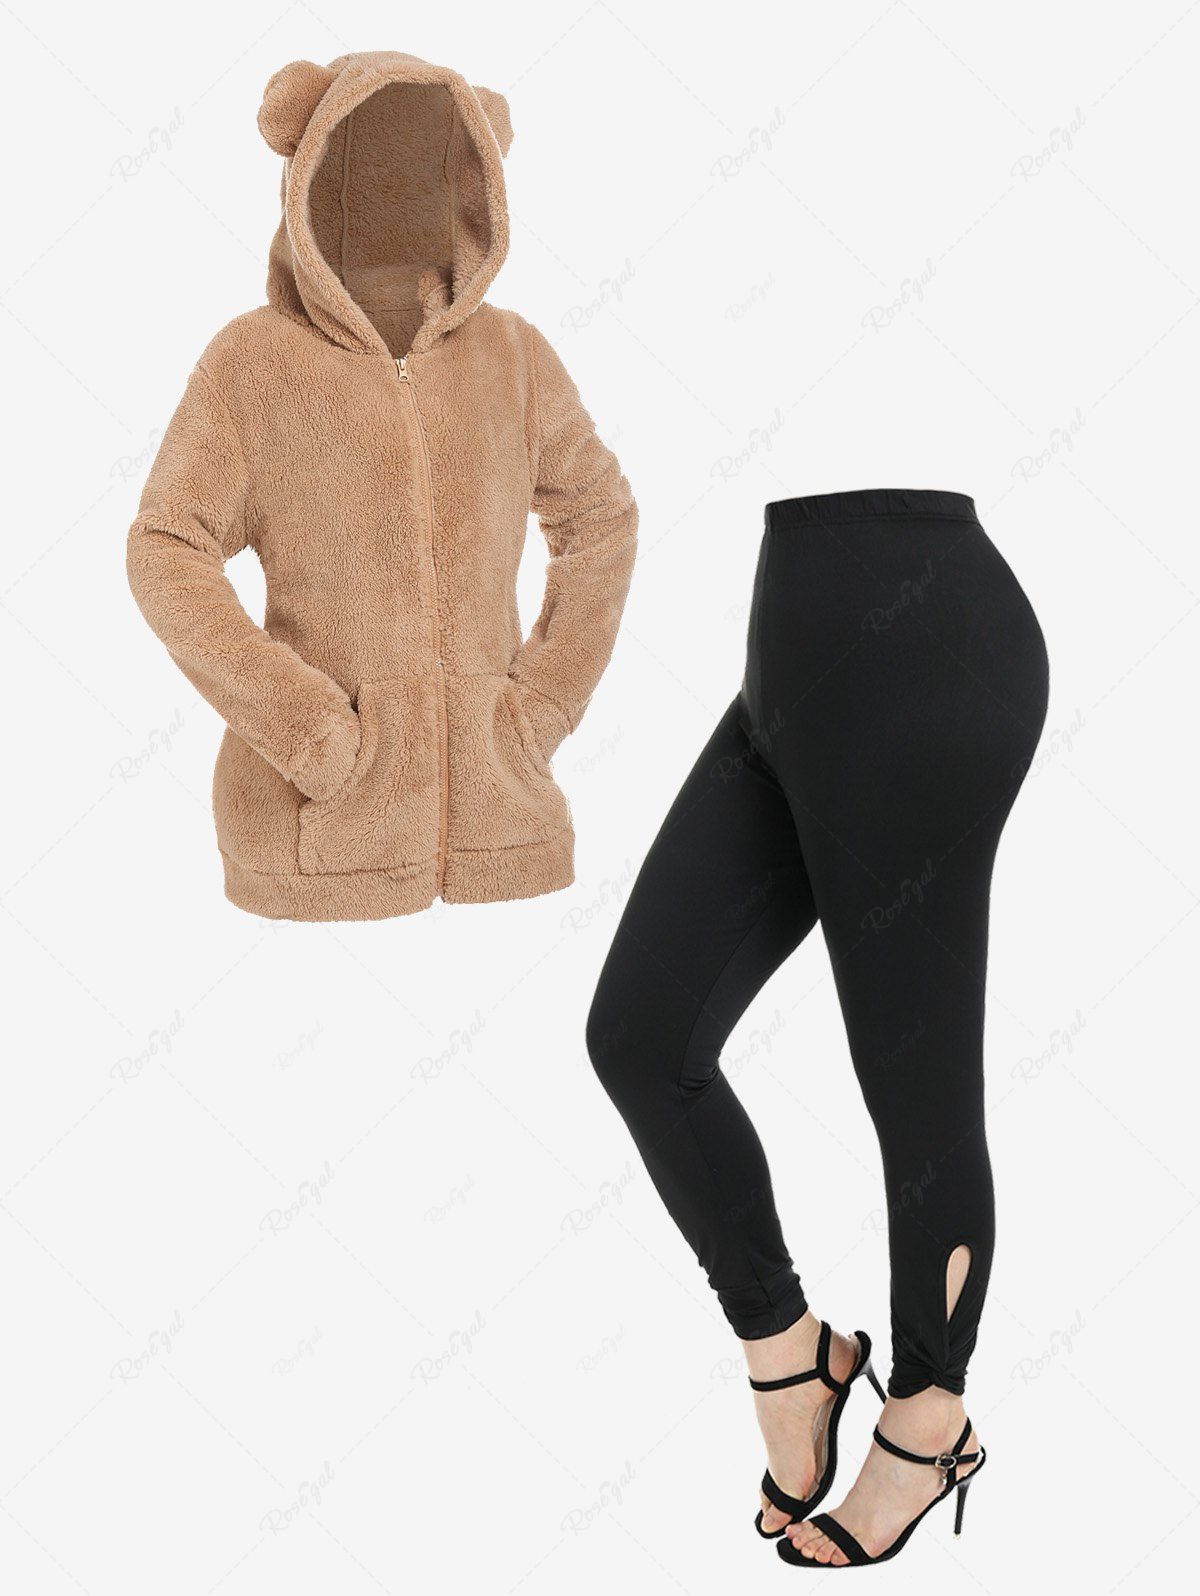 Hot Hooded Pockets Faux Fur Coat and High Rise Cutout Twist Leggings Plus Size Outerwear Outfit  